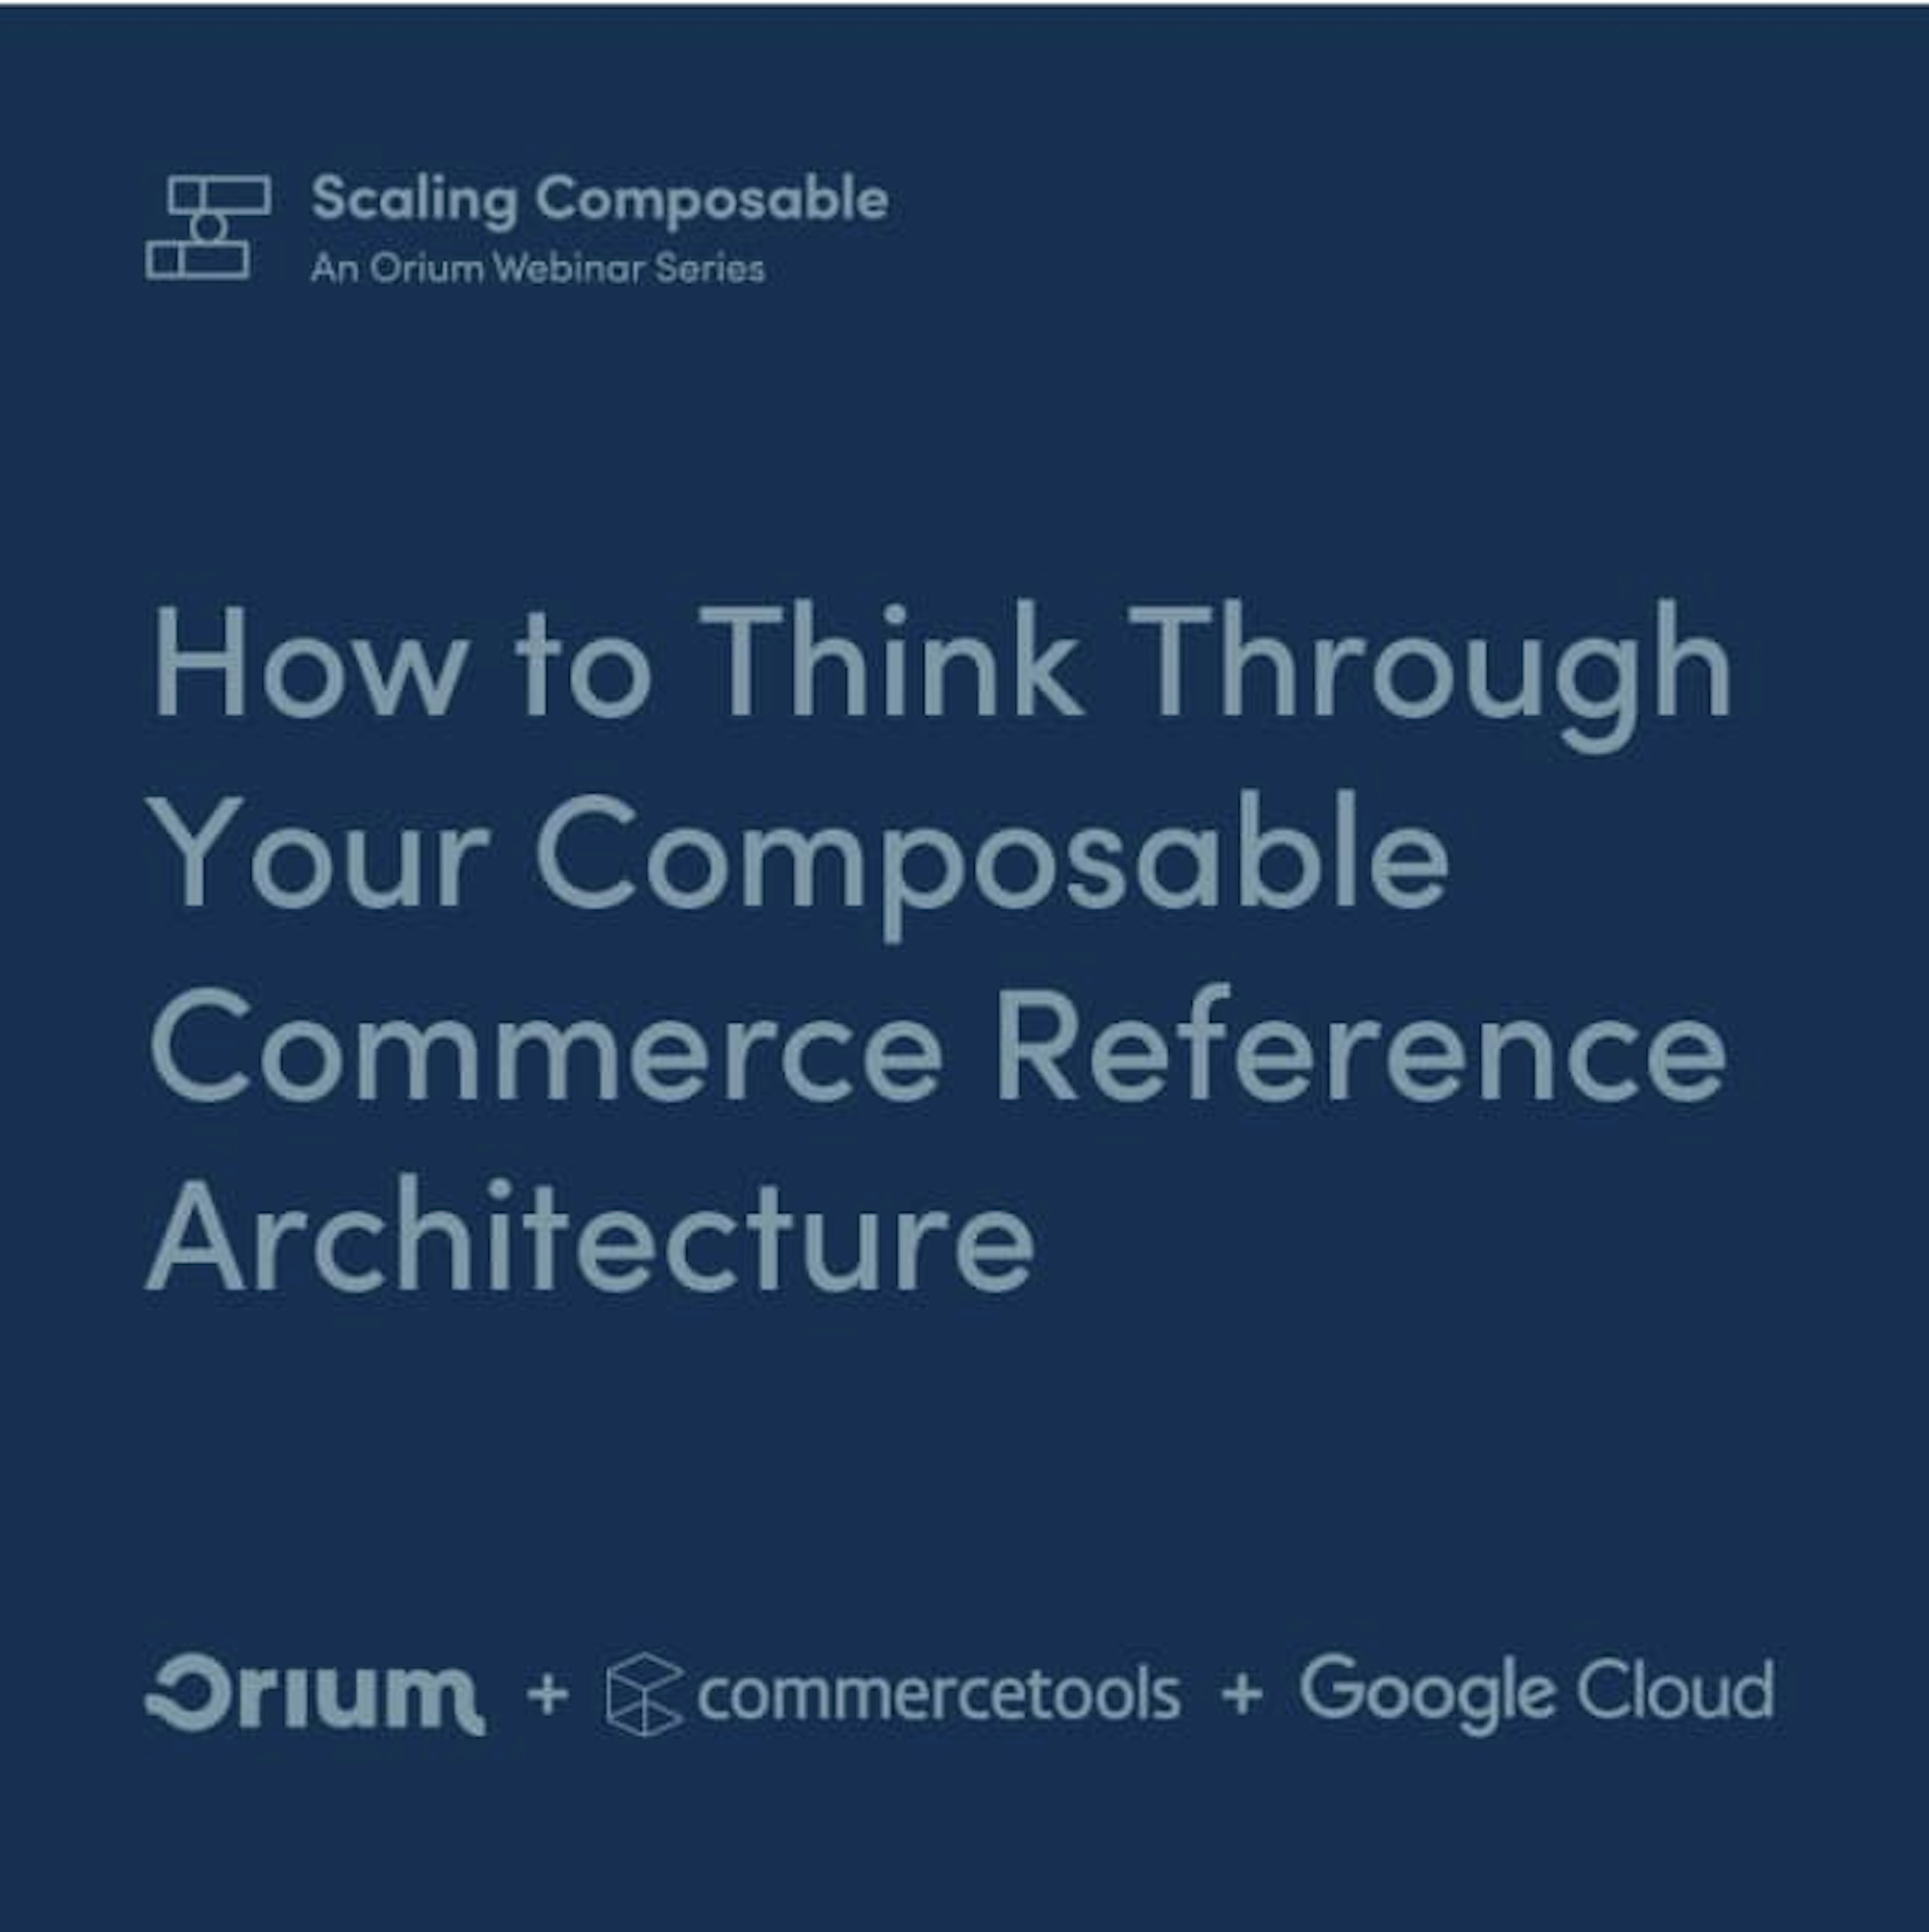 Thumbnail for a webinar called 'How to Think Through Your Composable Commerce Reference Architecture', part of Scaling Composable: An Orium Webinar Series.